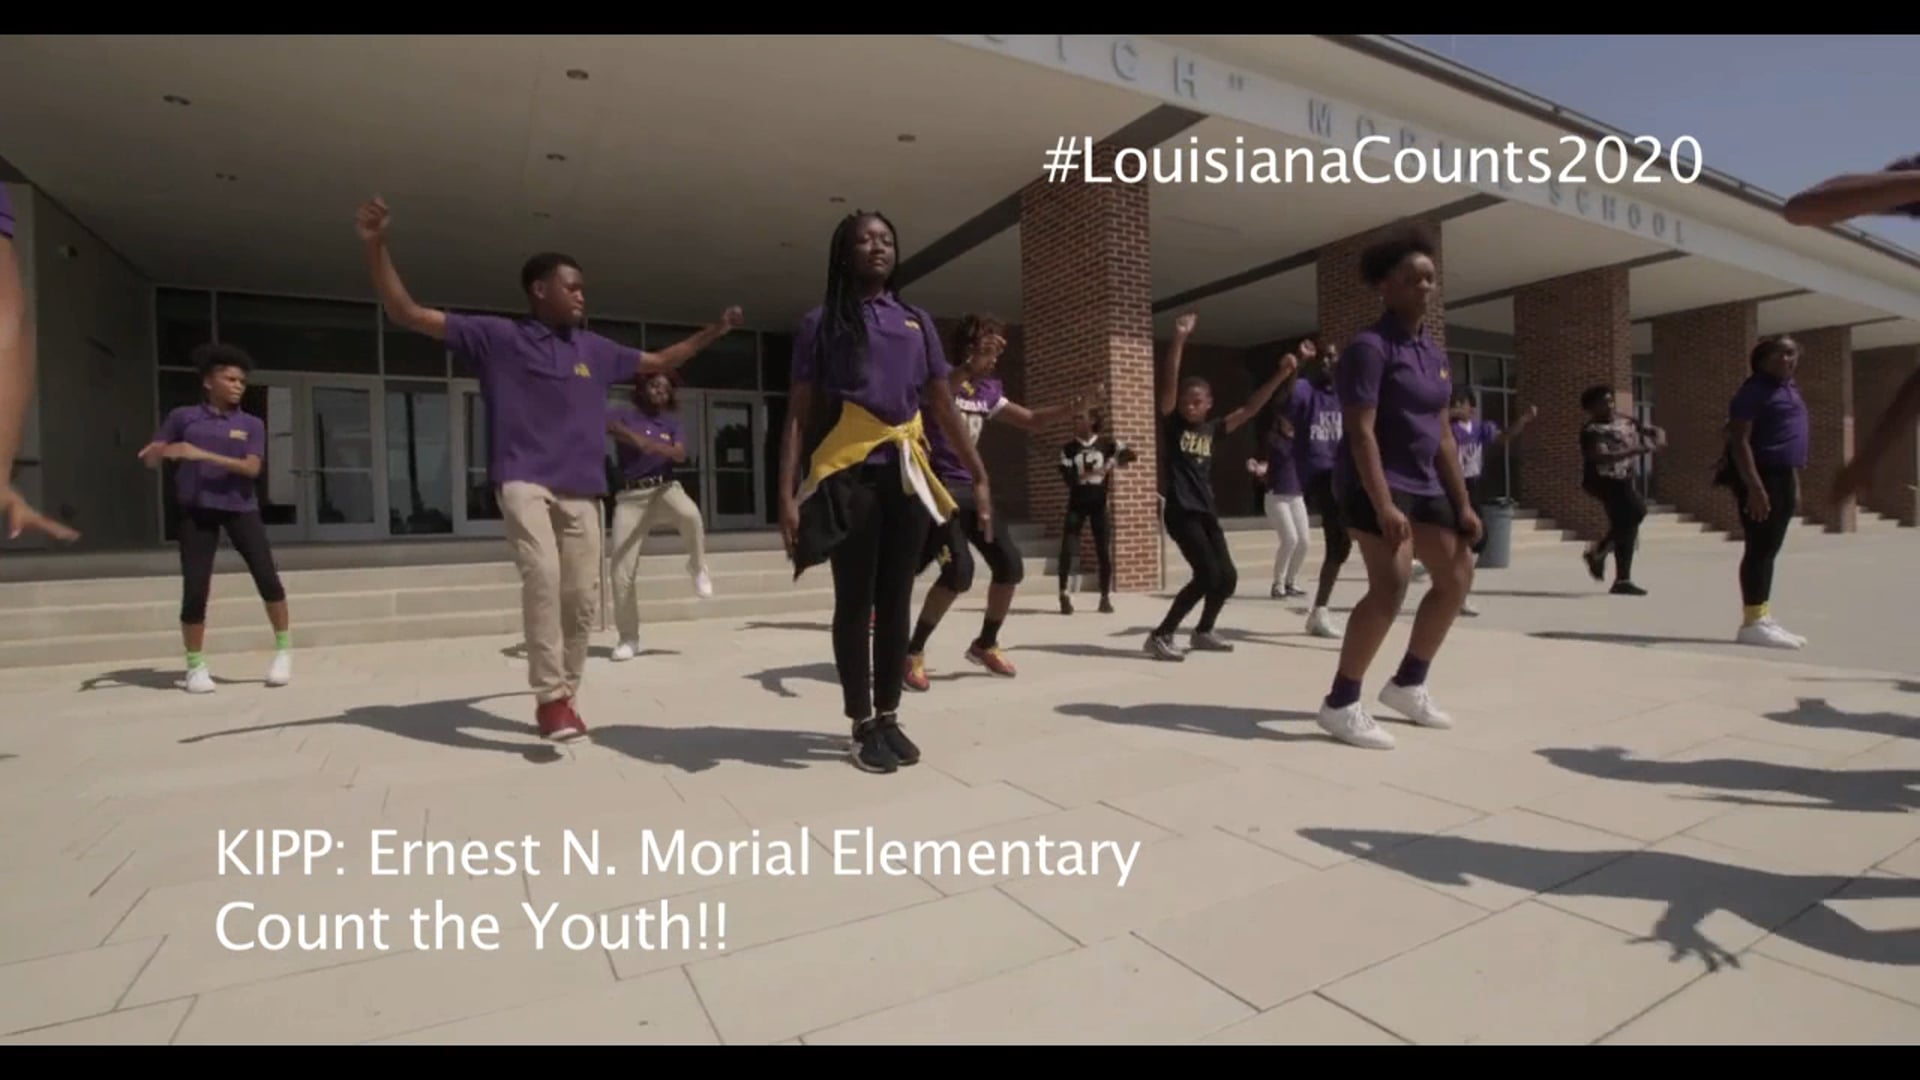 "Count Our Youth"